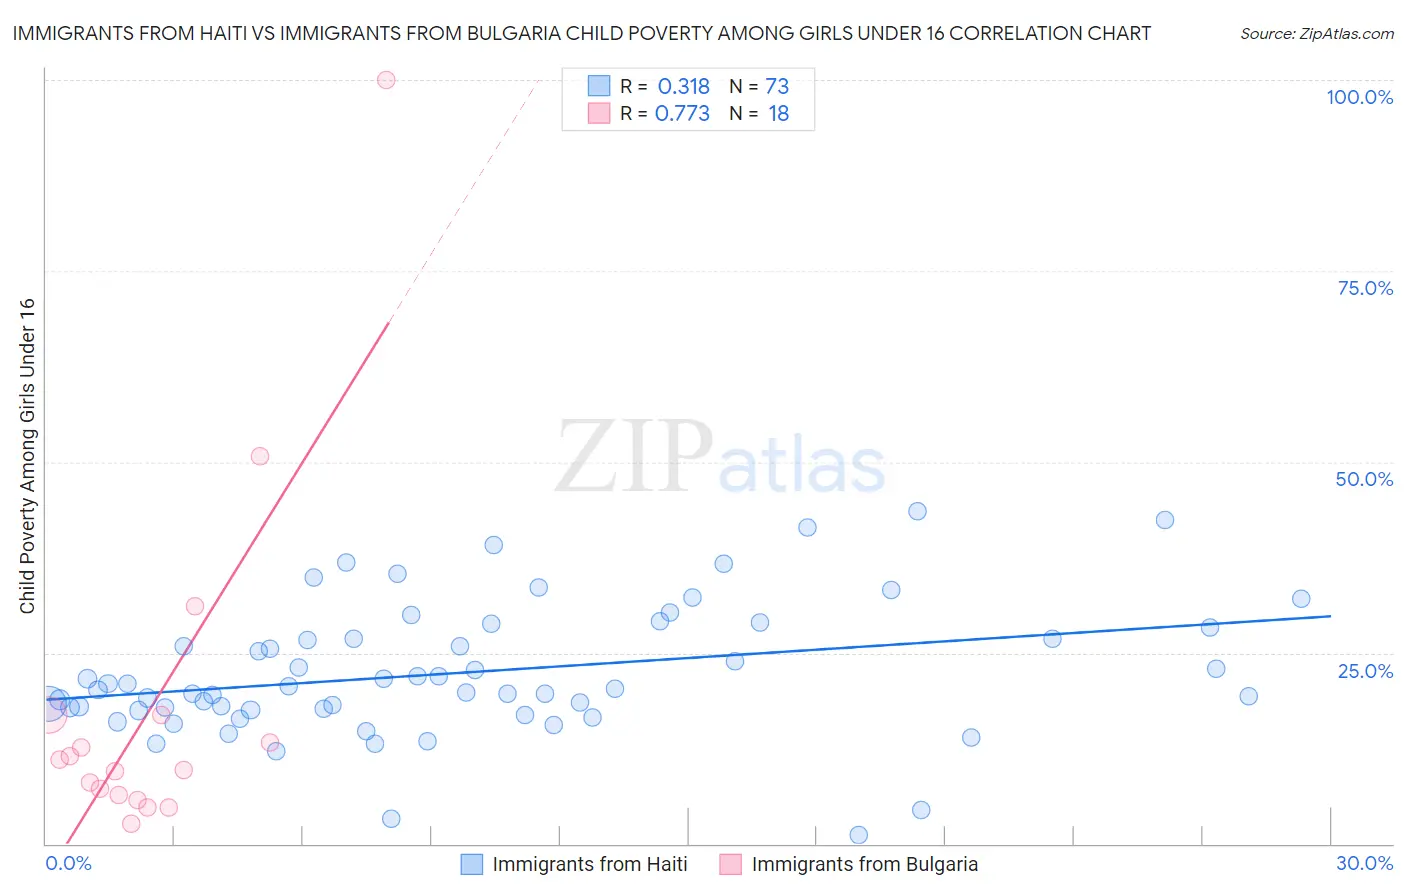 Immigrants from Haiti vs Immigrants from Bulgaria Child Poverty Among Girls Under 16